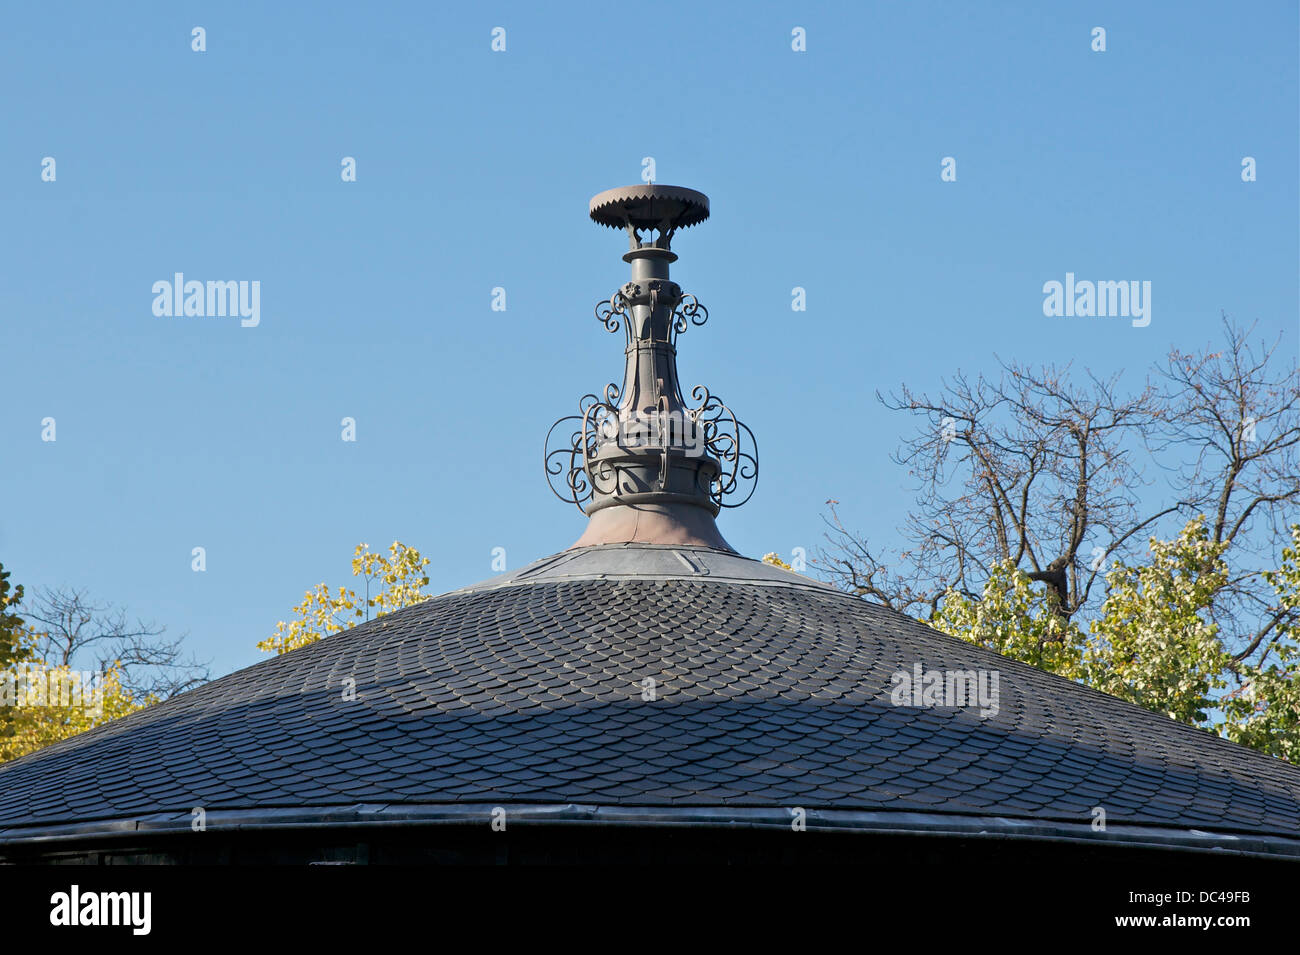 A finial over a slate roof in Jardin du Luxembourg, Paris. Stock Photo